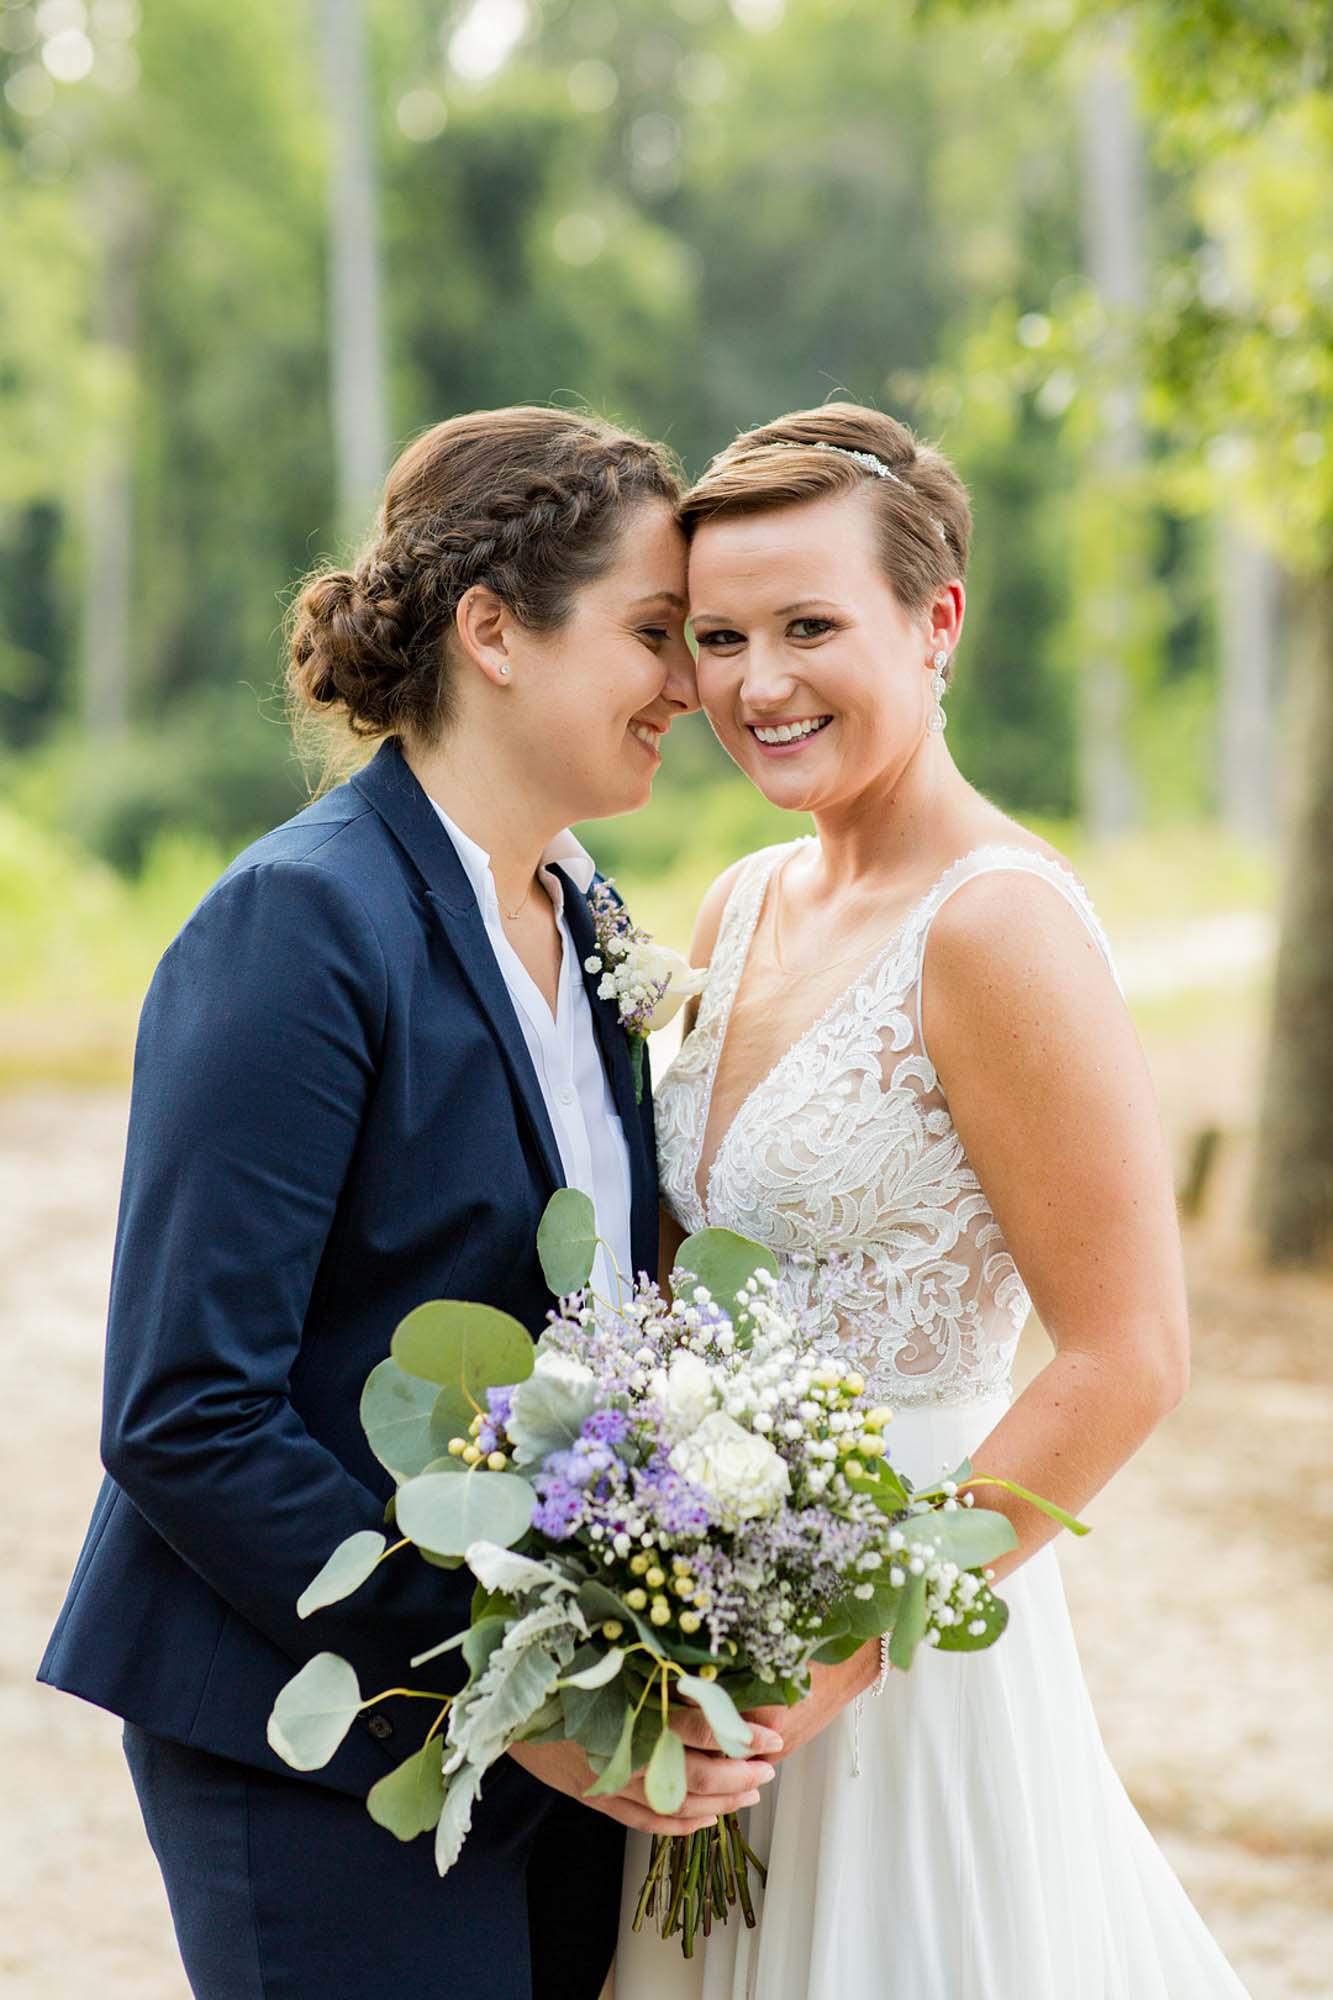 Rustic South Carolina micro wedding flowing with greenery | Jessica Hunt Photography | Featured on Equally Wed, the leading LGBTQ+ wedding magazine